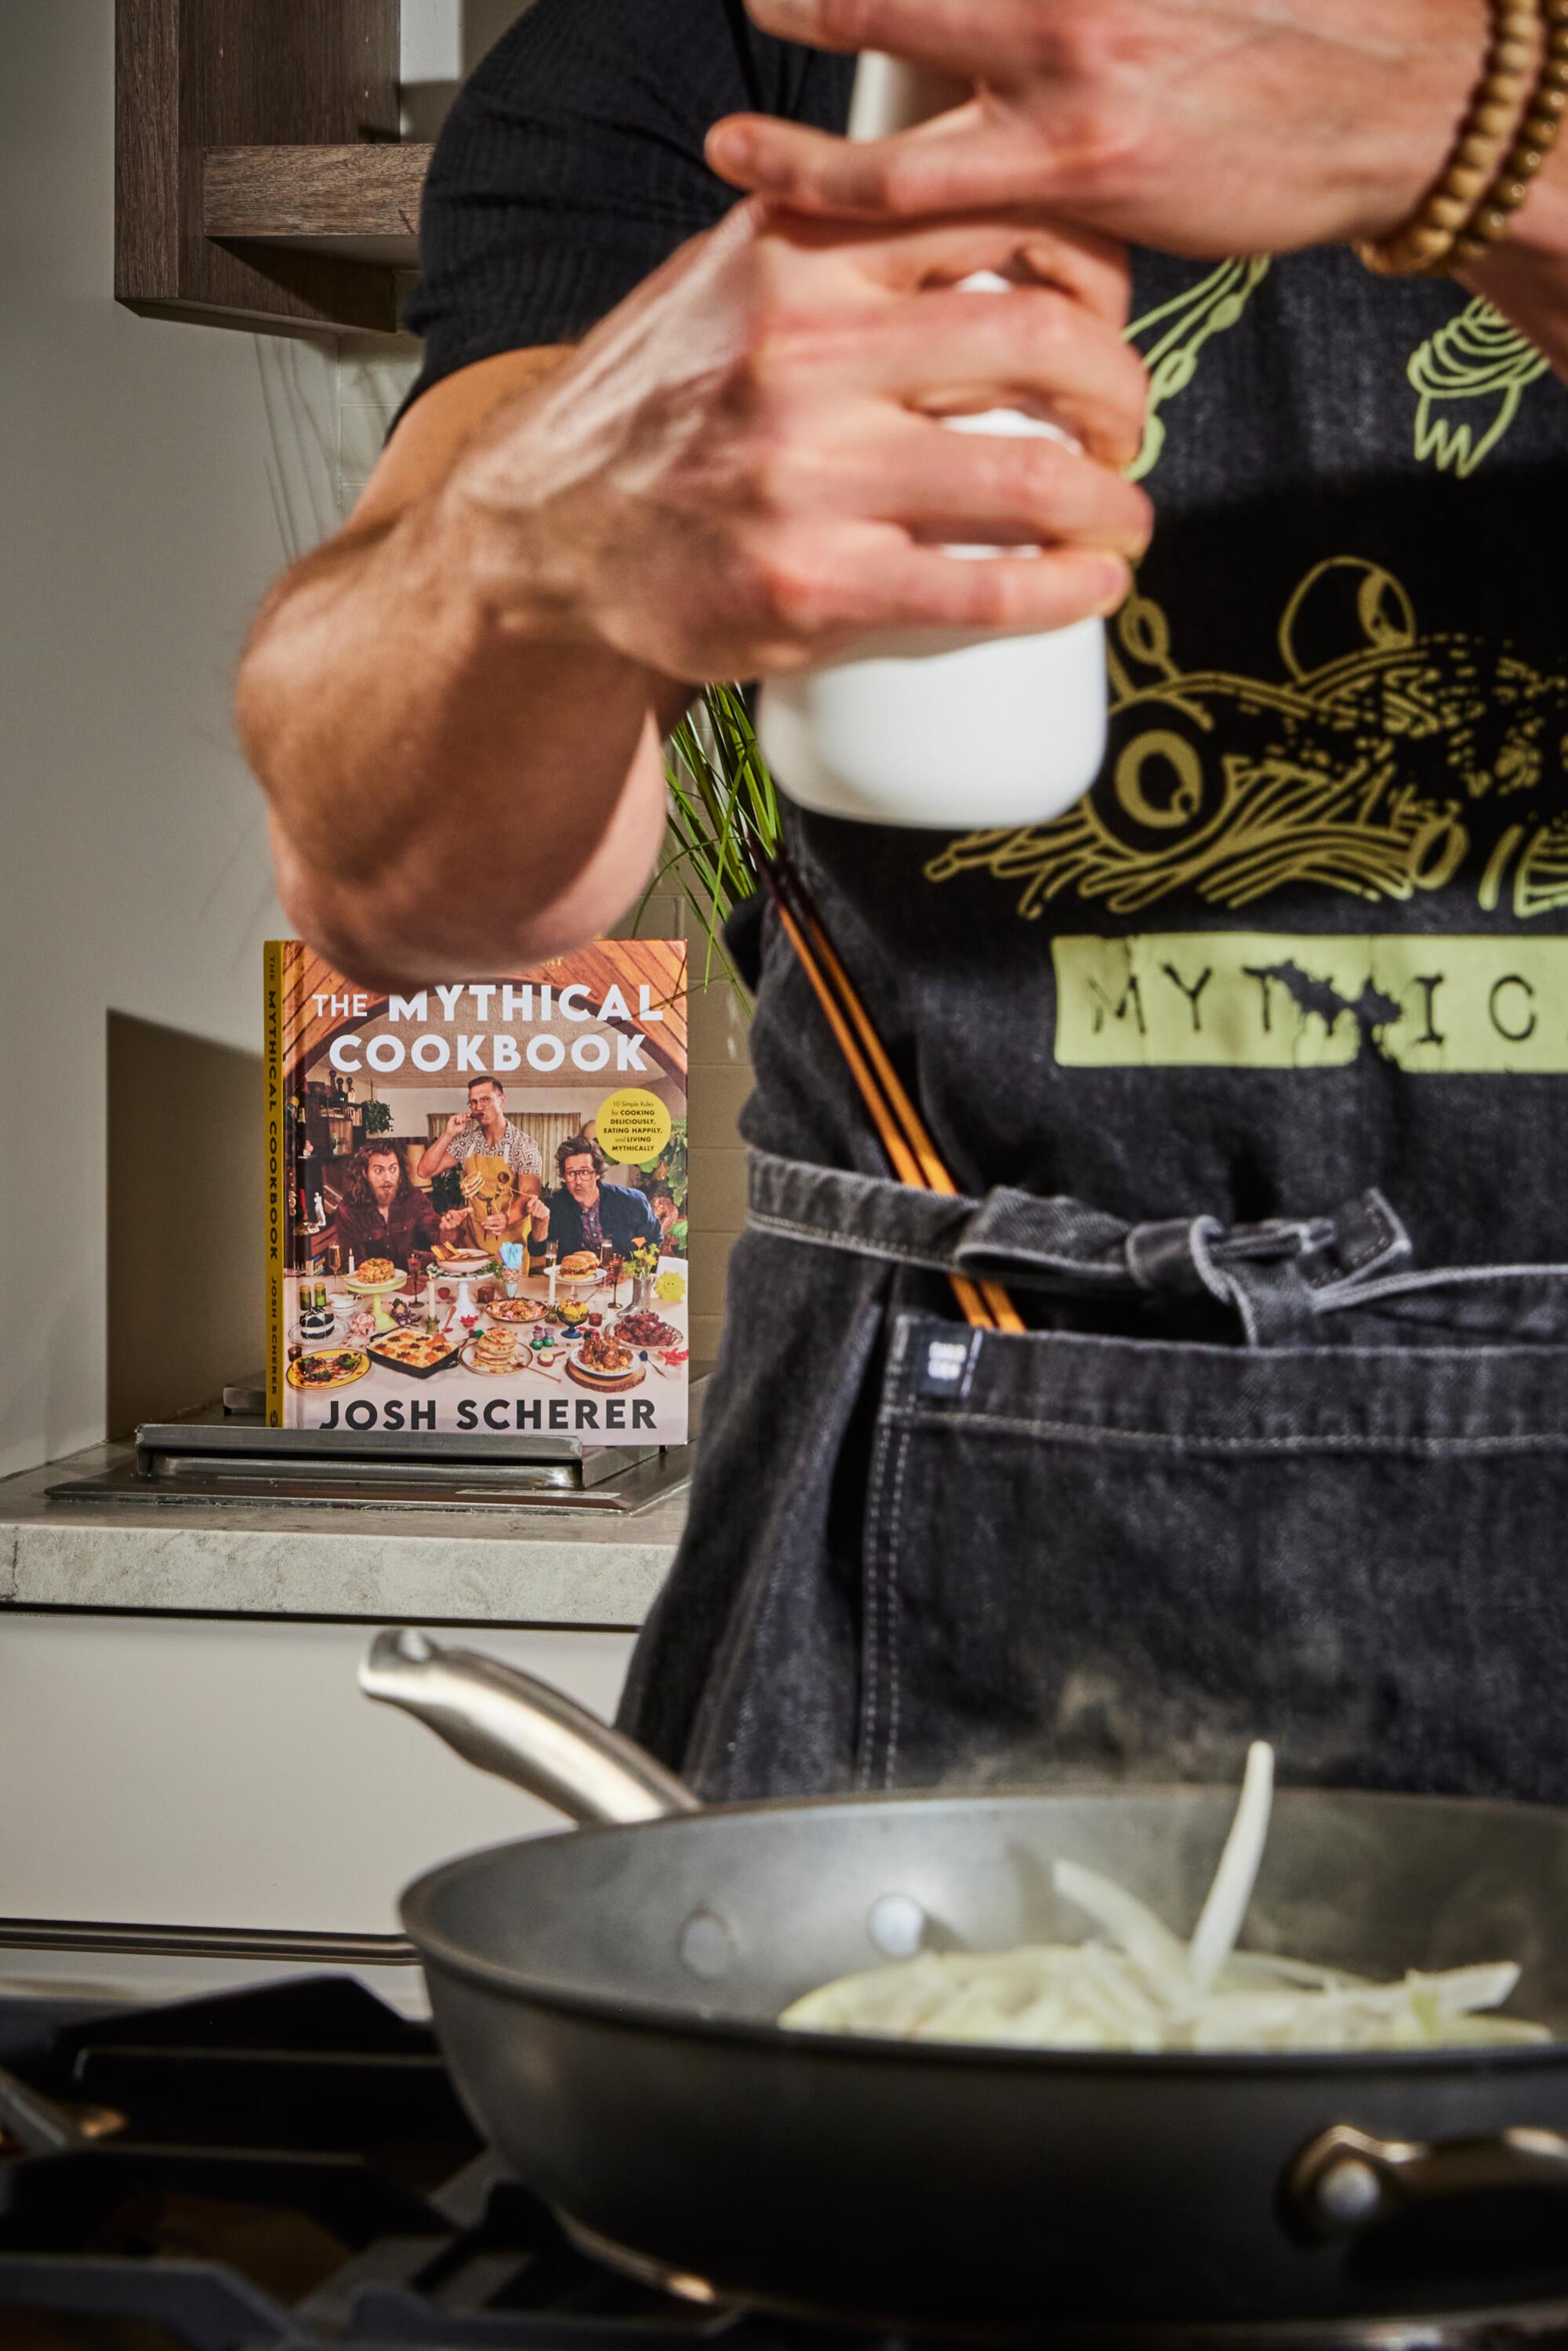 Josh Scherer cooks onions in the L.A. Times Test Kitchen. Behind him is a copy of his cookbook.